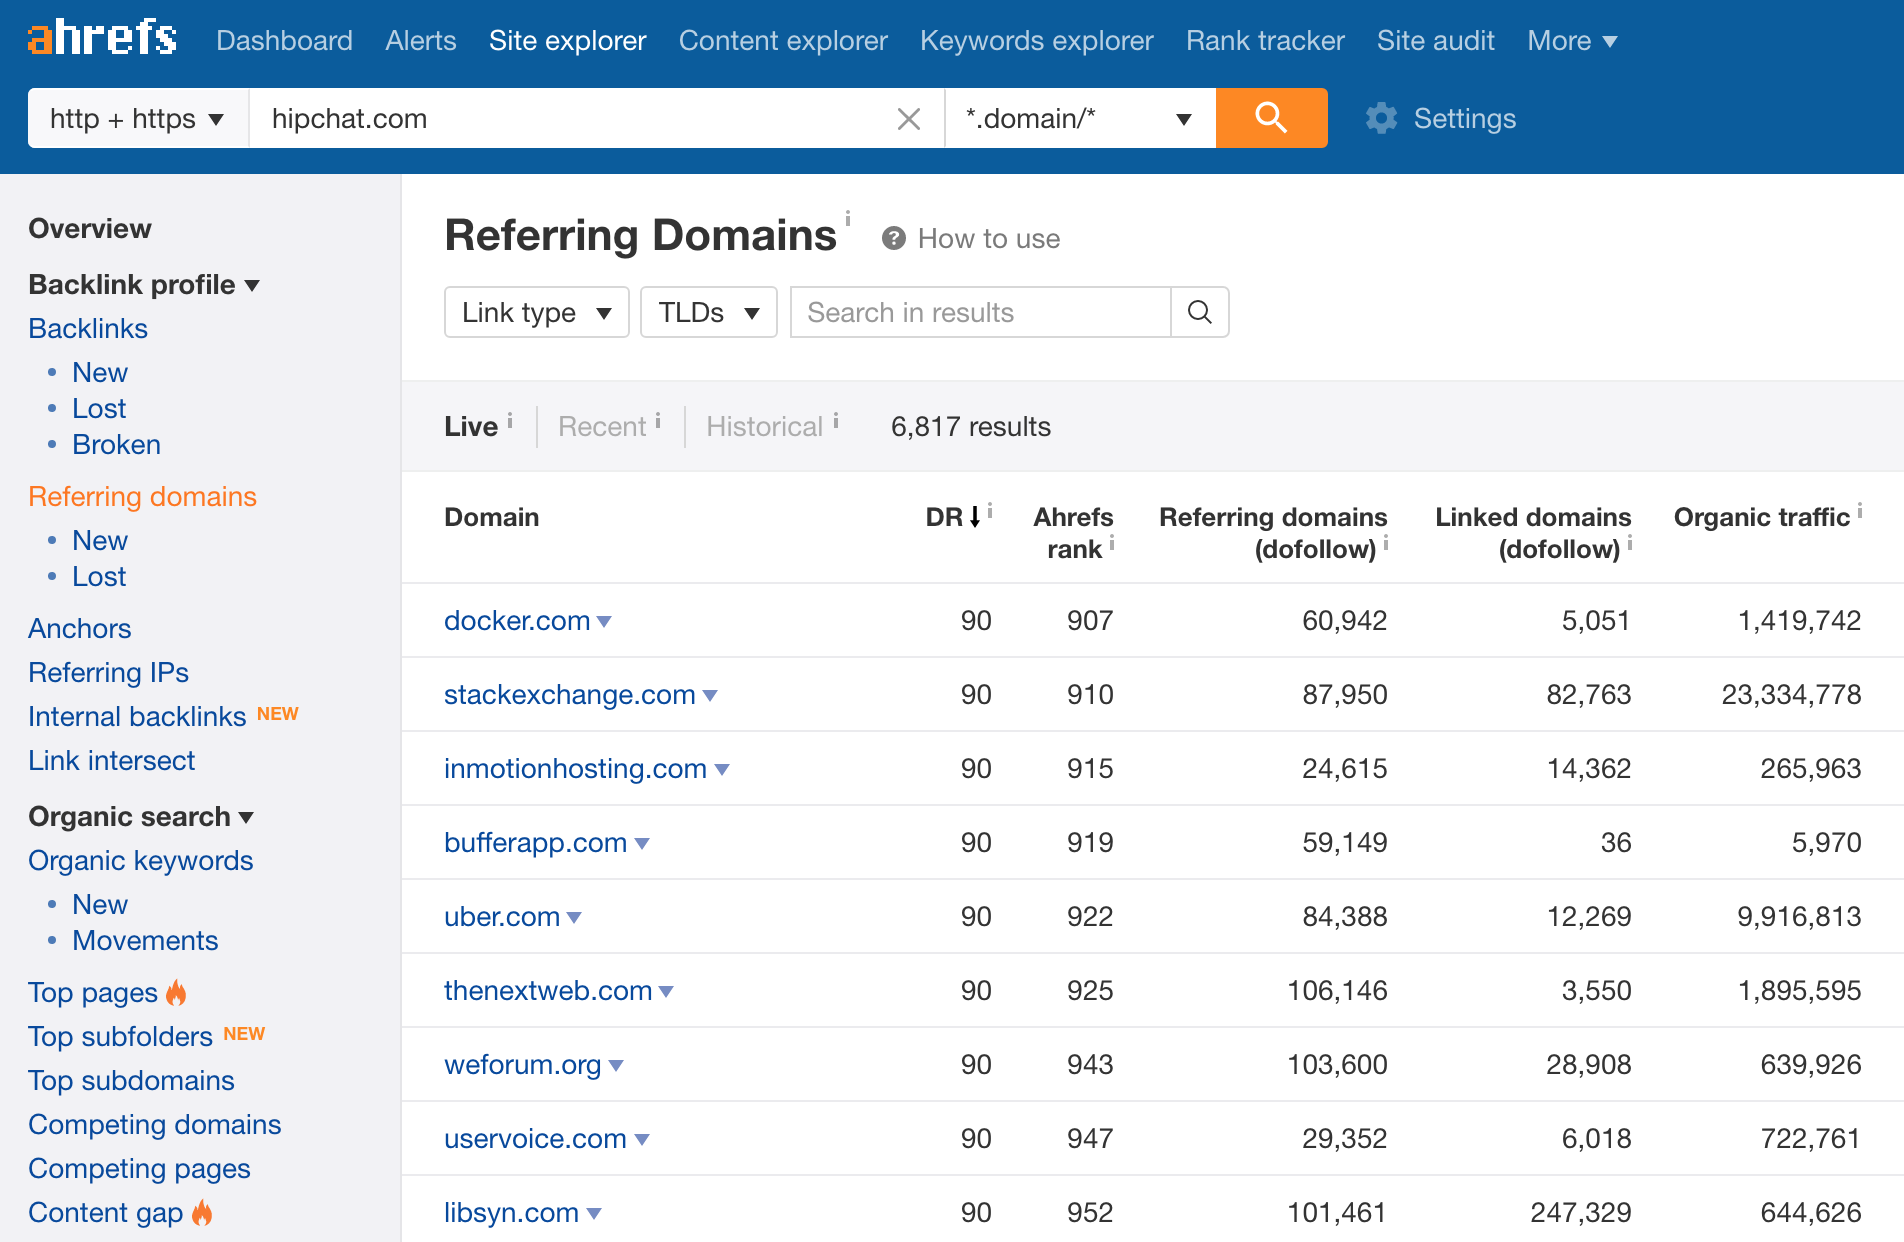 The Ultimate Guide to Backlink Building for Your SaaS Website